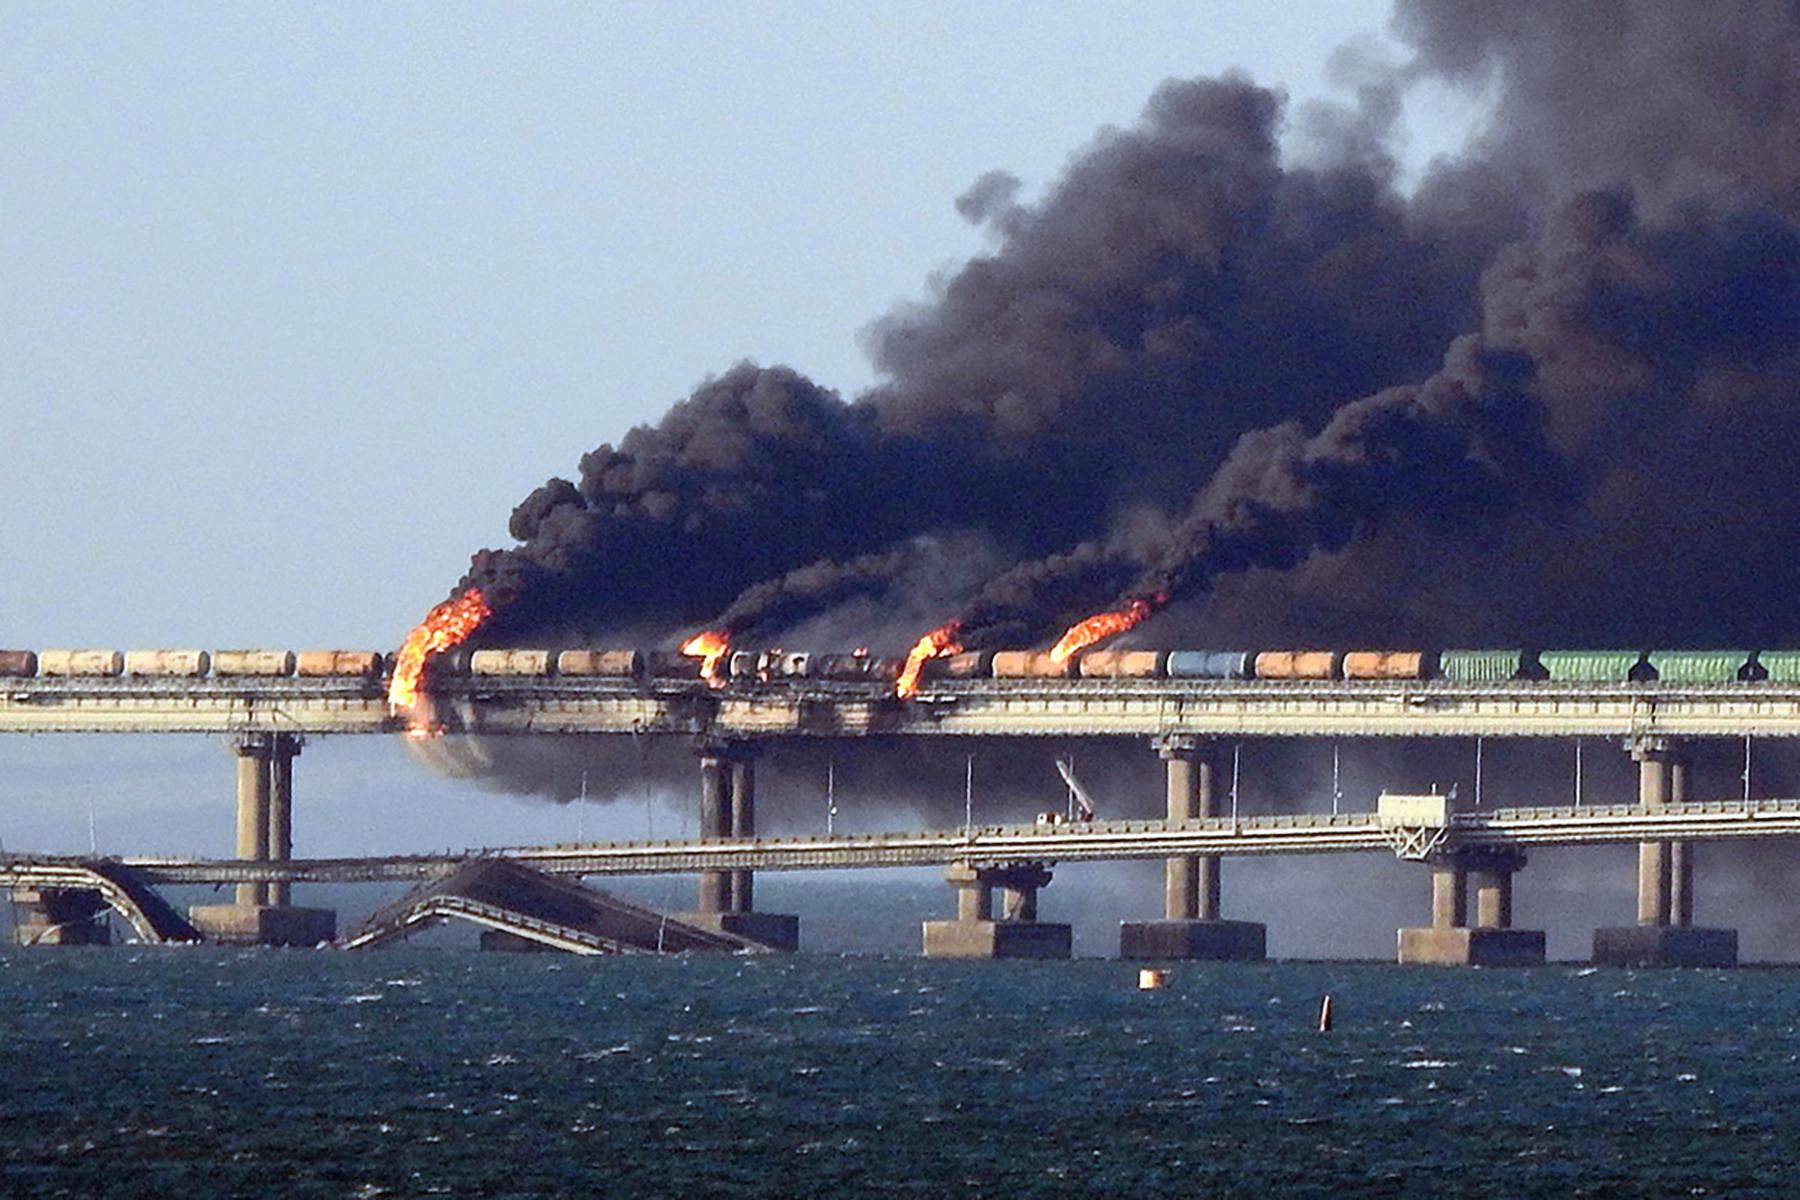 The photo shows the fire that broke out on the bridge during the attack in October 2022.